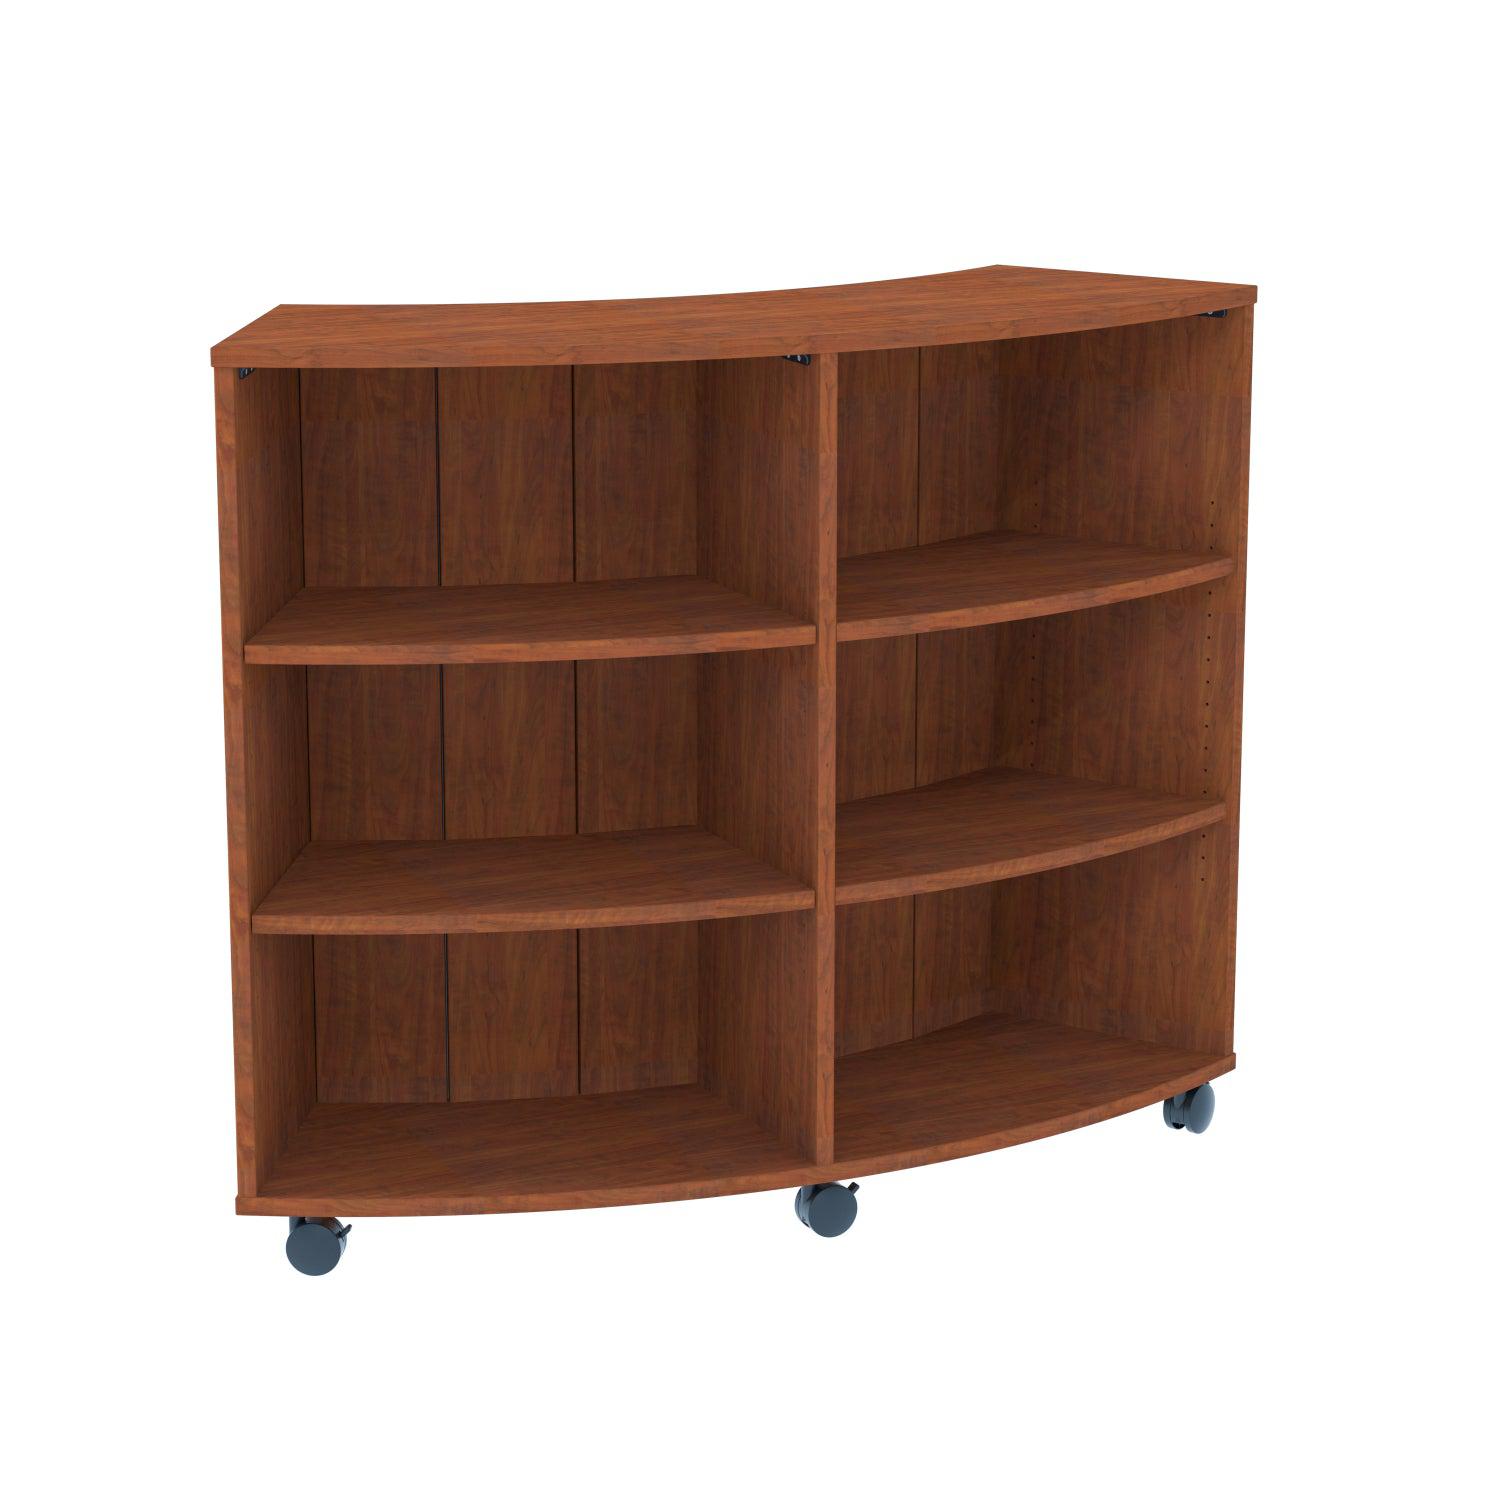 Single-Sided Curved Mobile Bookcase with 6 Shelves, 48" High